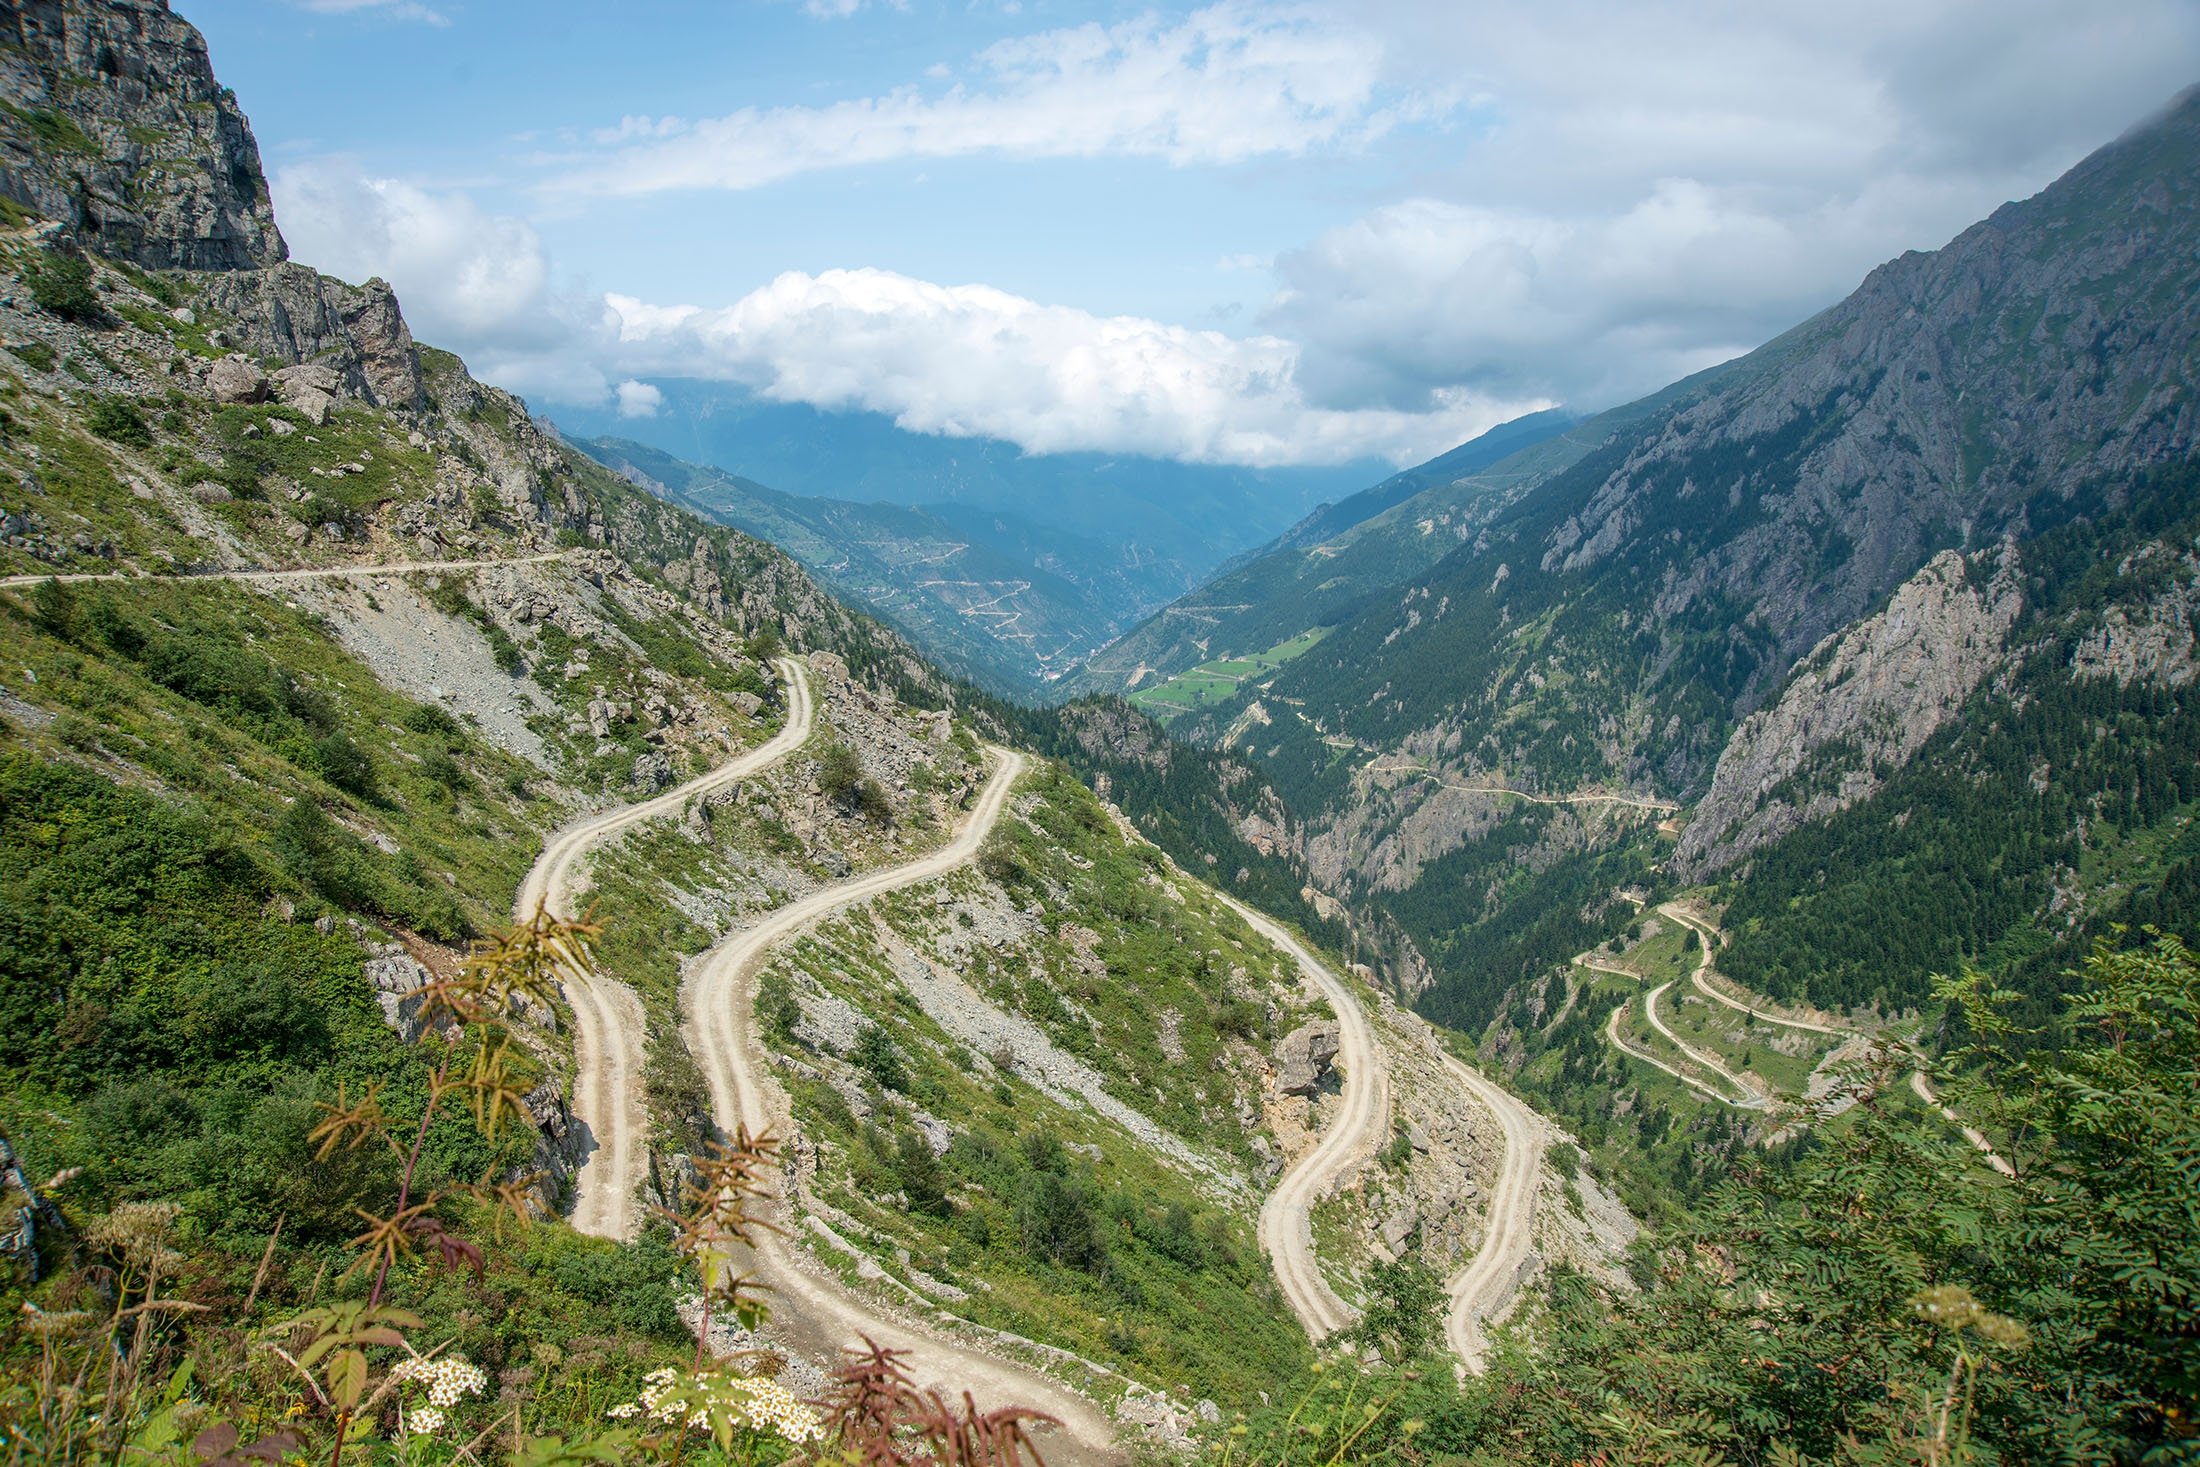 Traversing the Soğanlı Mountain between inland Bayburt and the coastal provinces of Trabzon, Derebaşı Bends has 13 hairpin bends, which would be impossible to manage in a single maneuver.  (Photo Shutterstock)